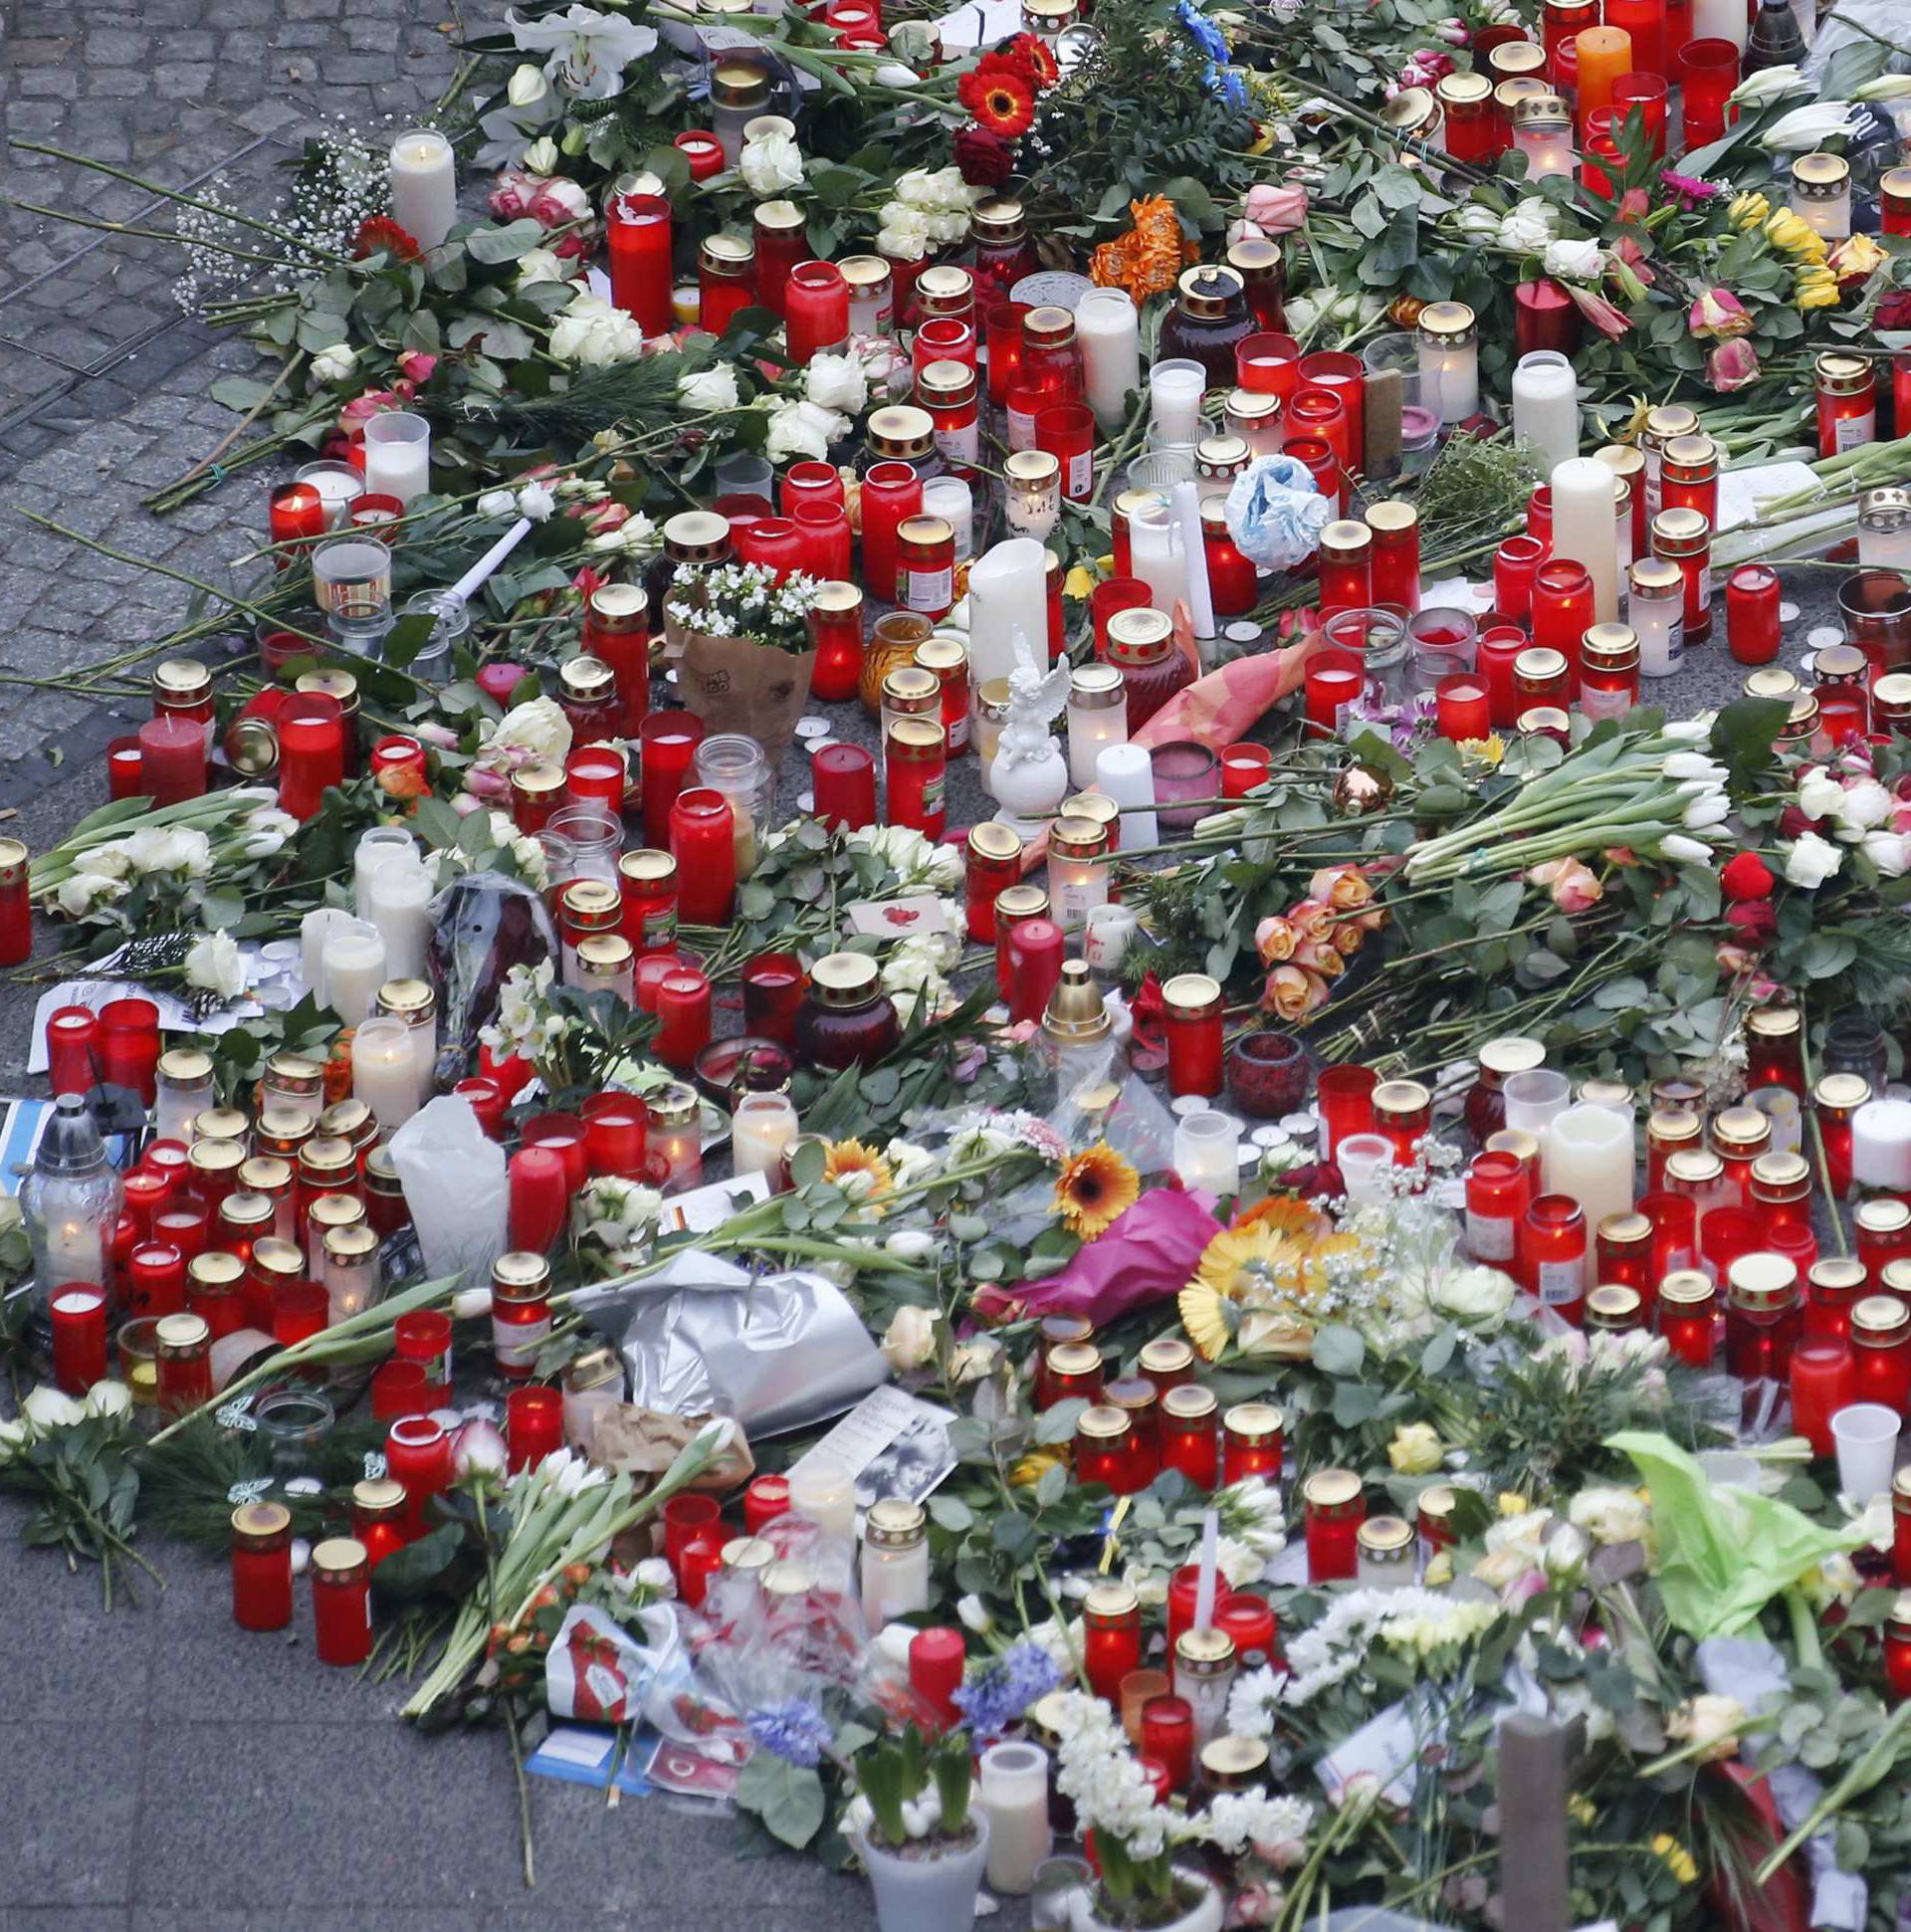 Flowers and candles are placed near the Christmas market in Berlin